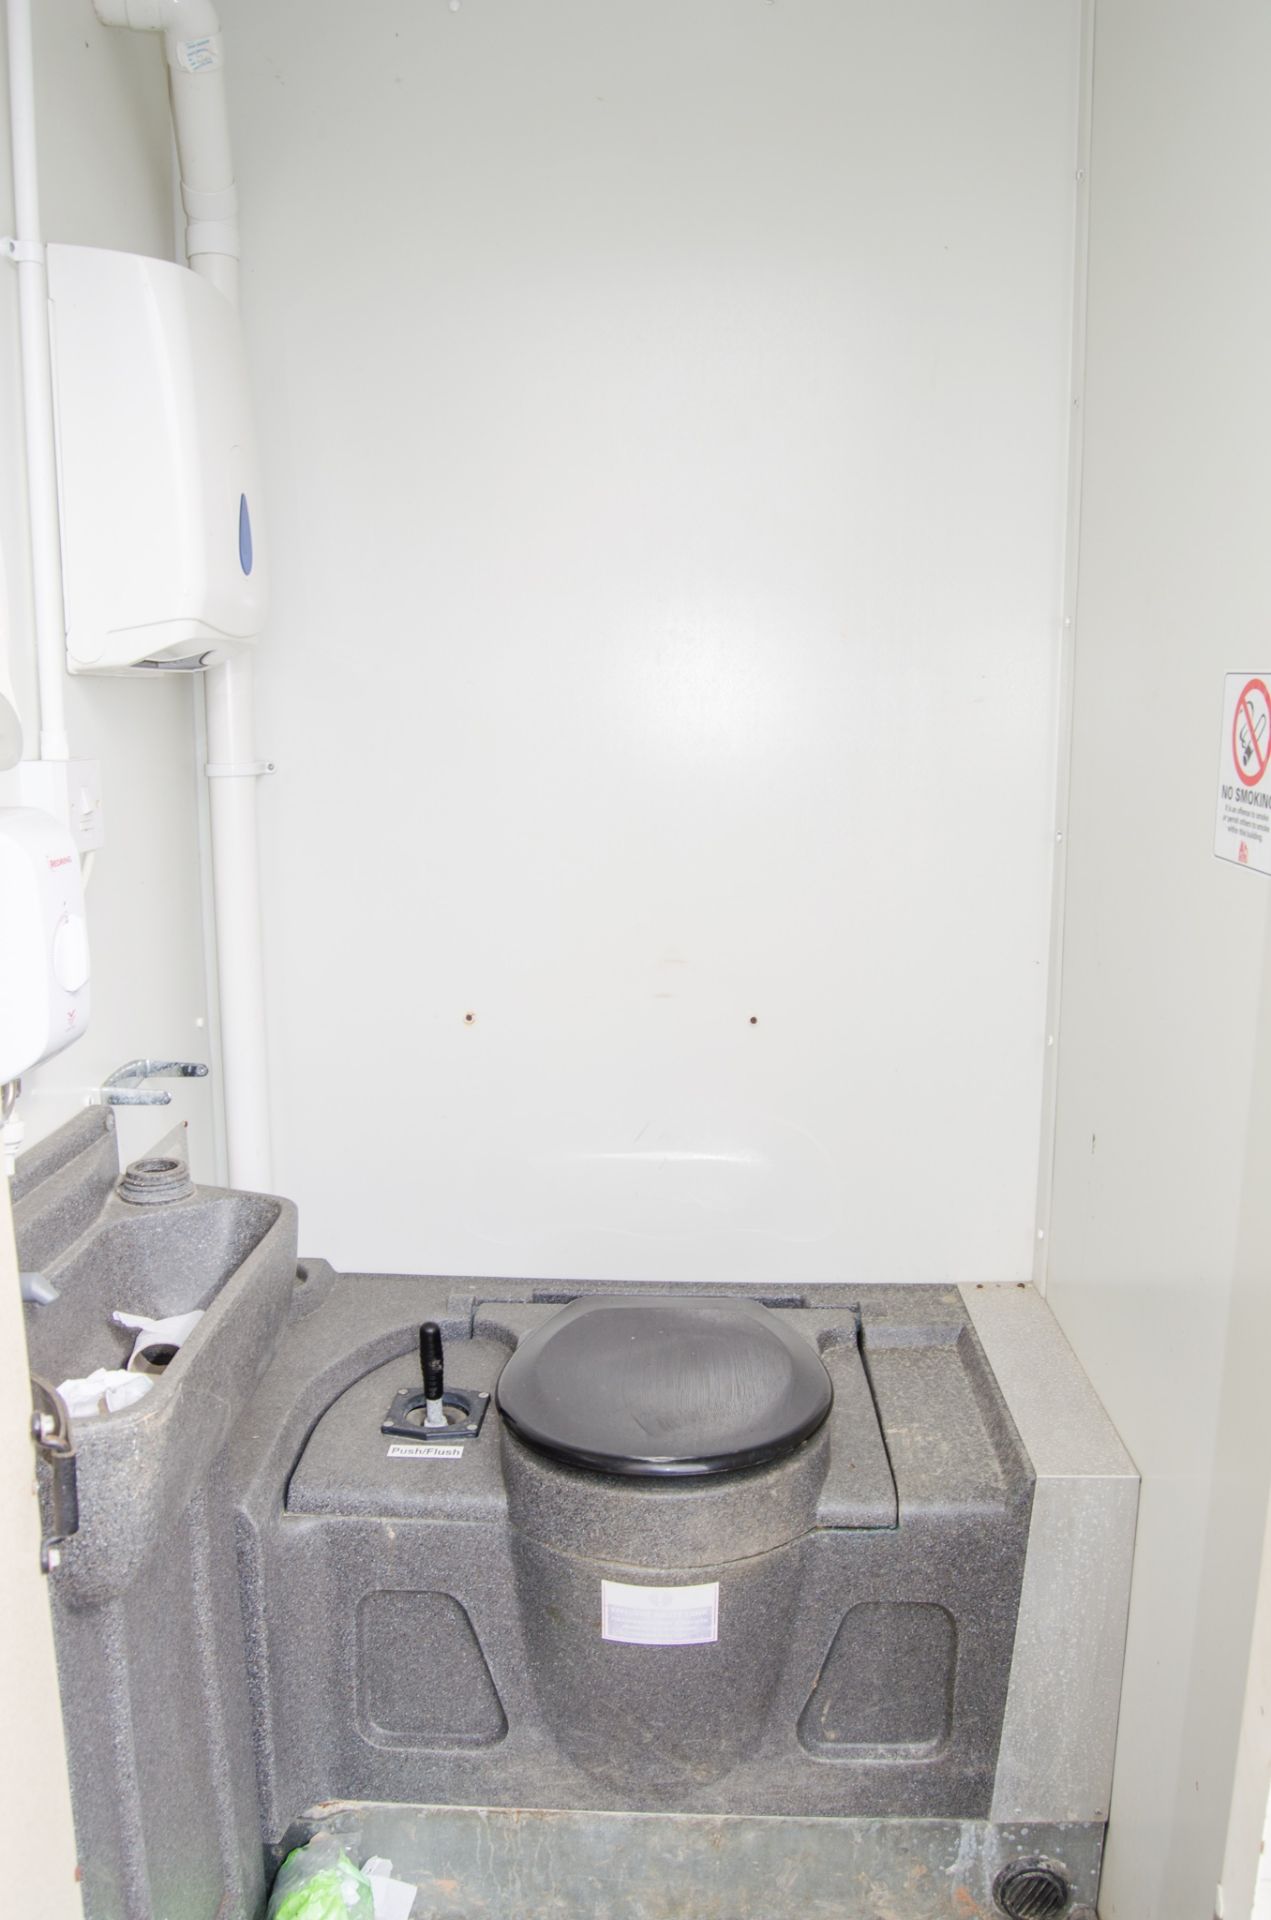 18 ft x 9 ft steel anti vandal welfare site unit Comprising of: canteen area, drying room, - Image 9 of 10